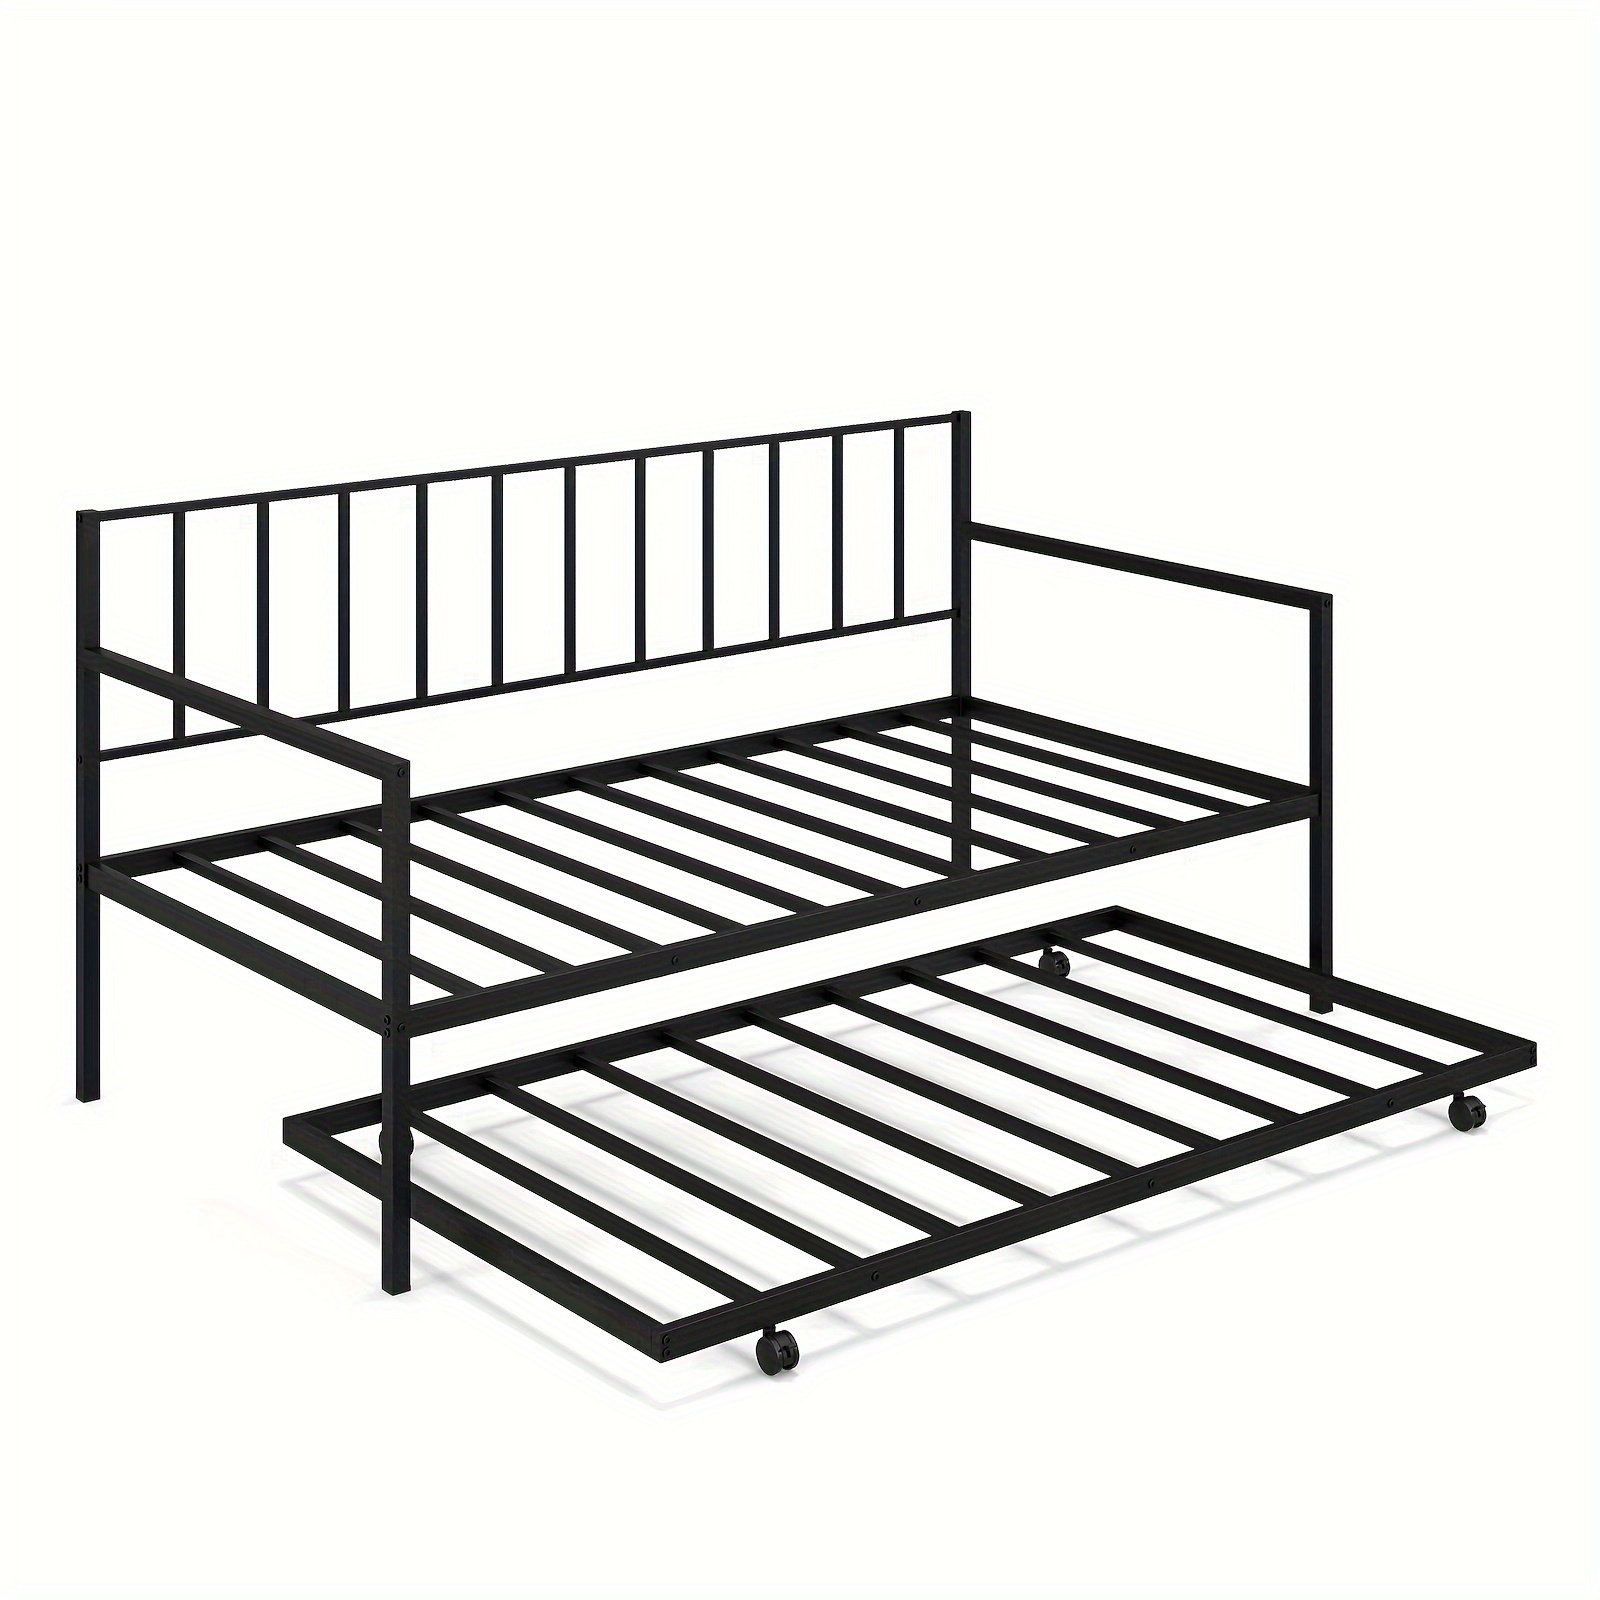 

1pc Twin Metal Daybed Sofa Bed With Trundle, Lockable Casters, For Living Room, Guest Room – Black, Sturdy Frame, 77x38x38.5 Inches, 500lbs/400lbs Weight Capacity